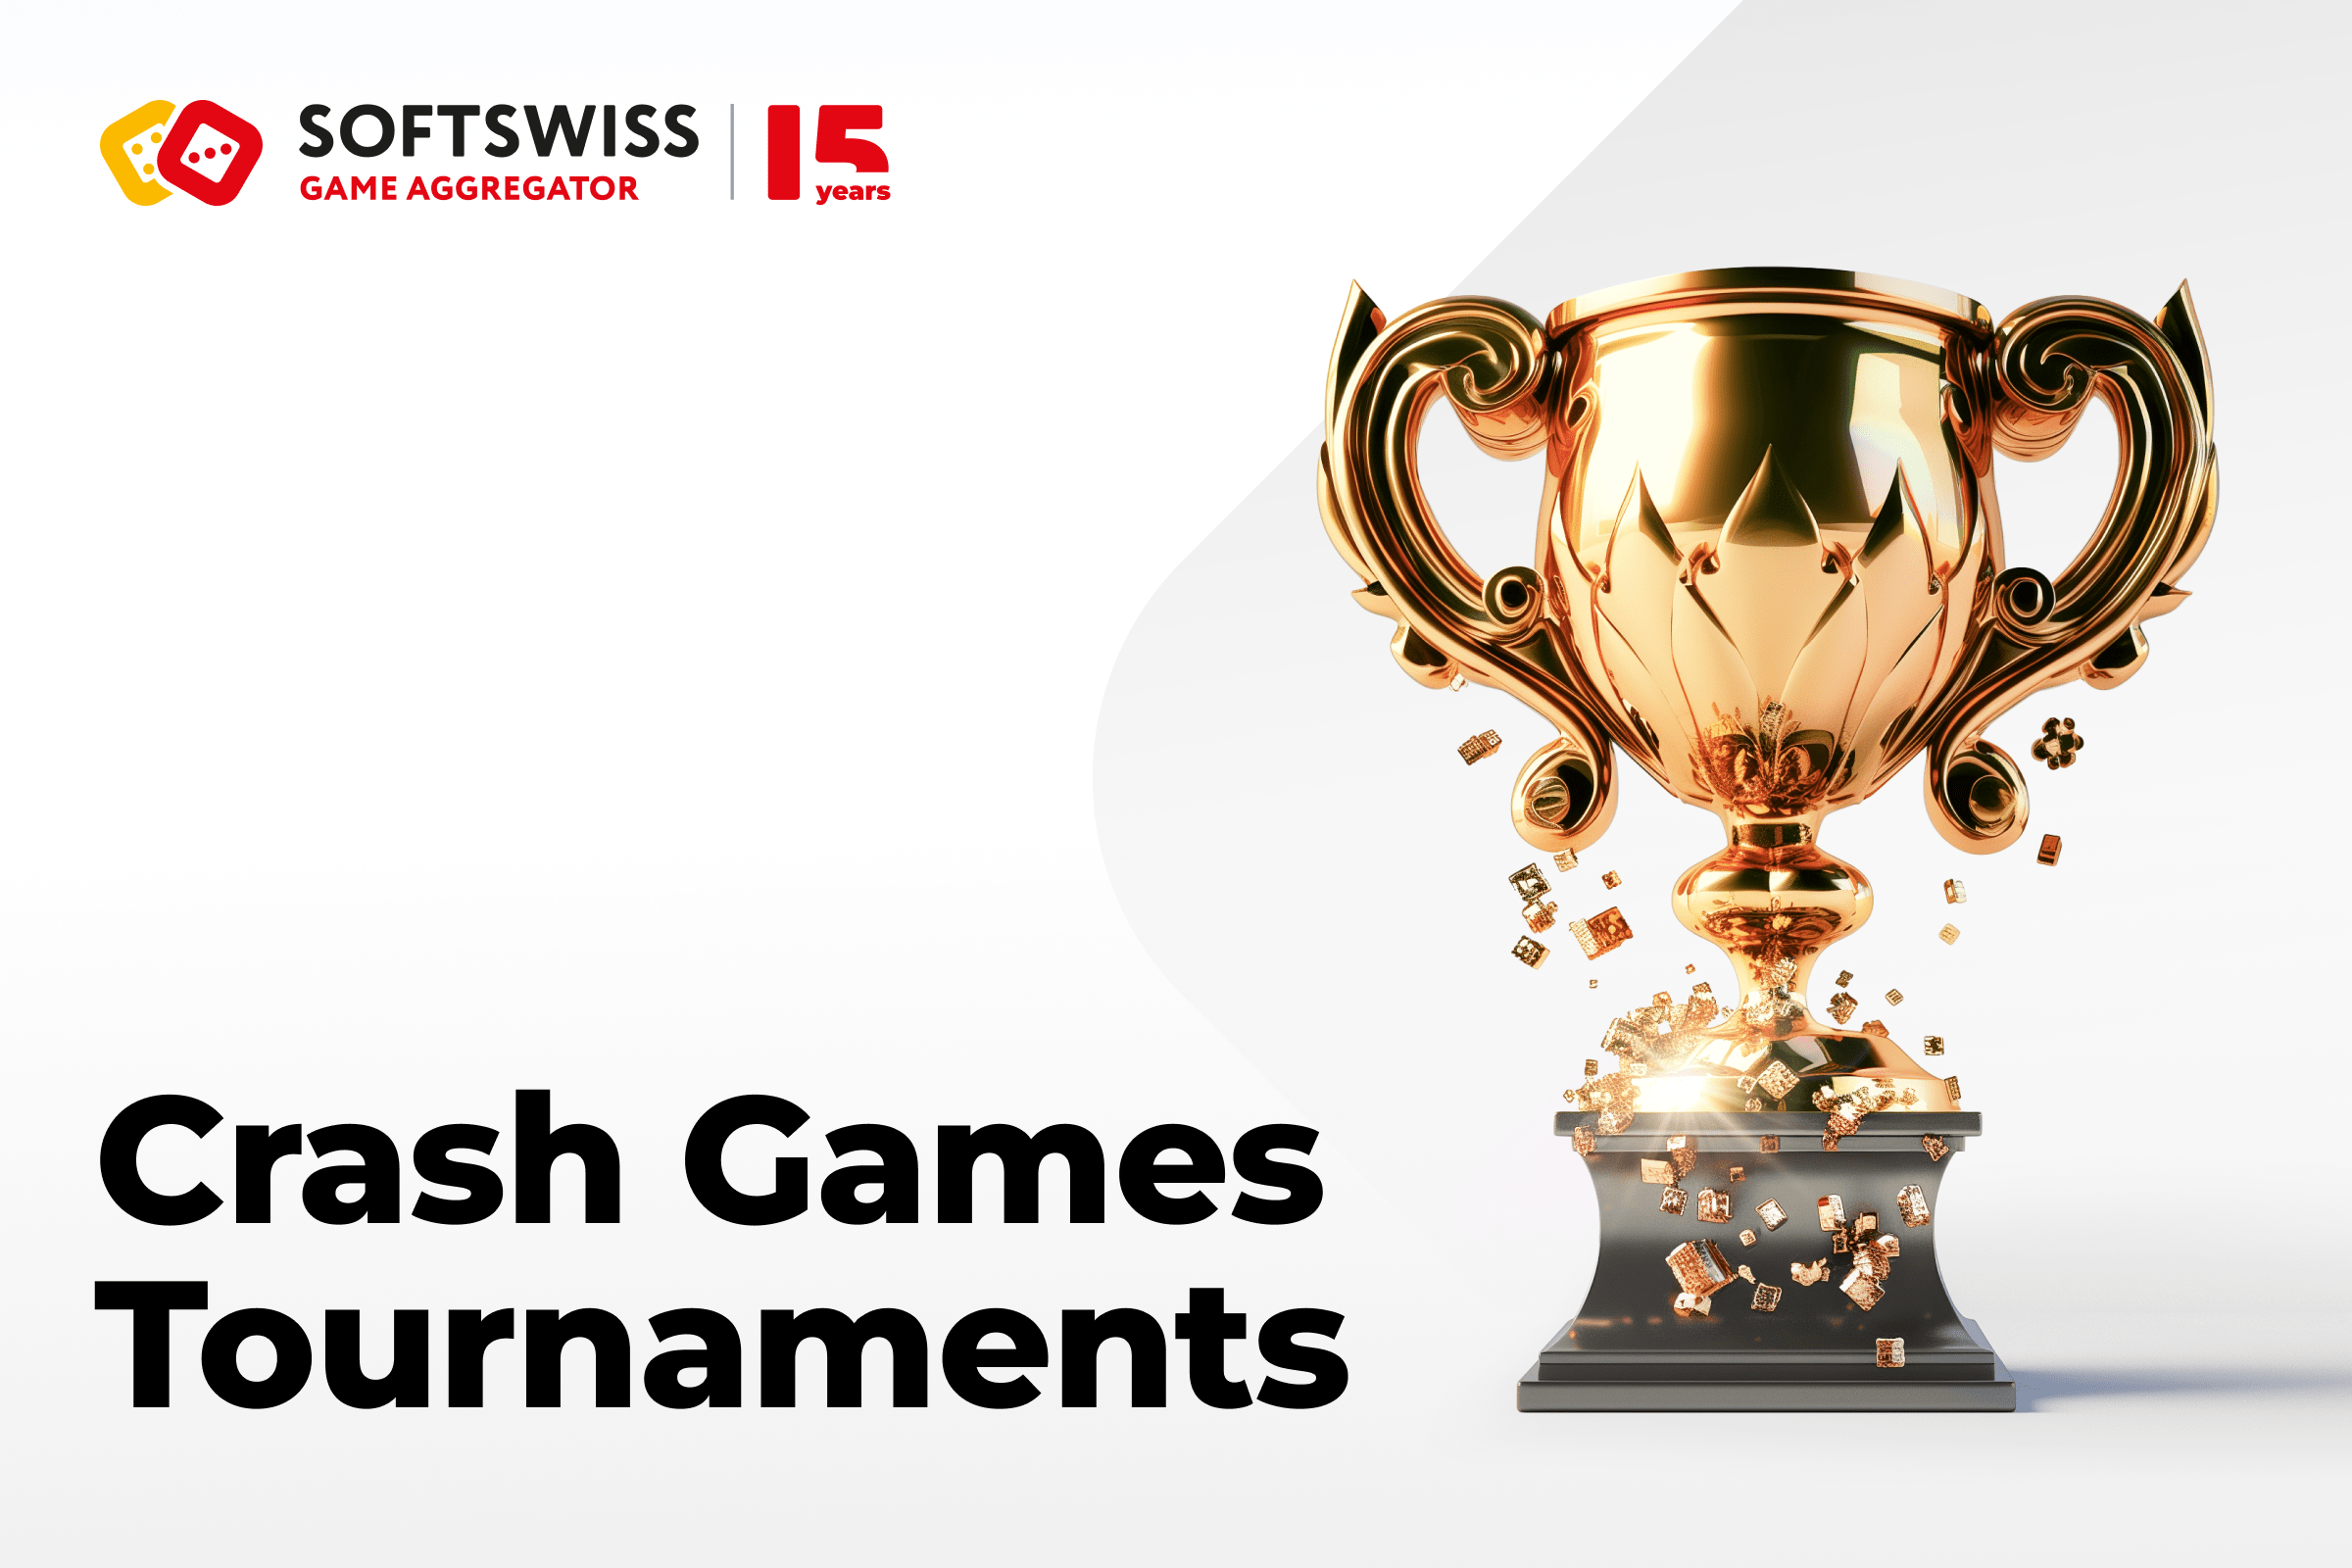 SOFTSWISS Game Aggregator Launches Crash Game Tournaments